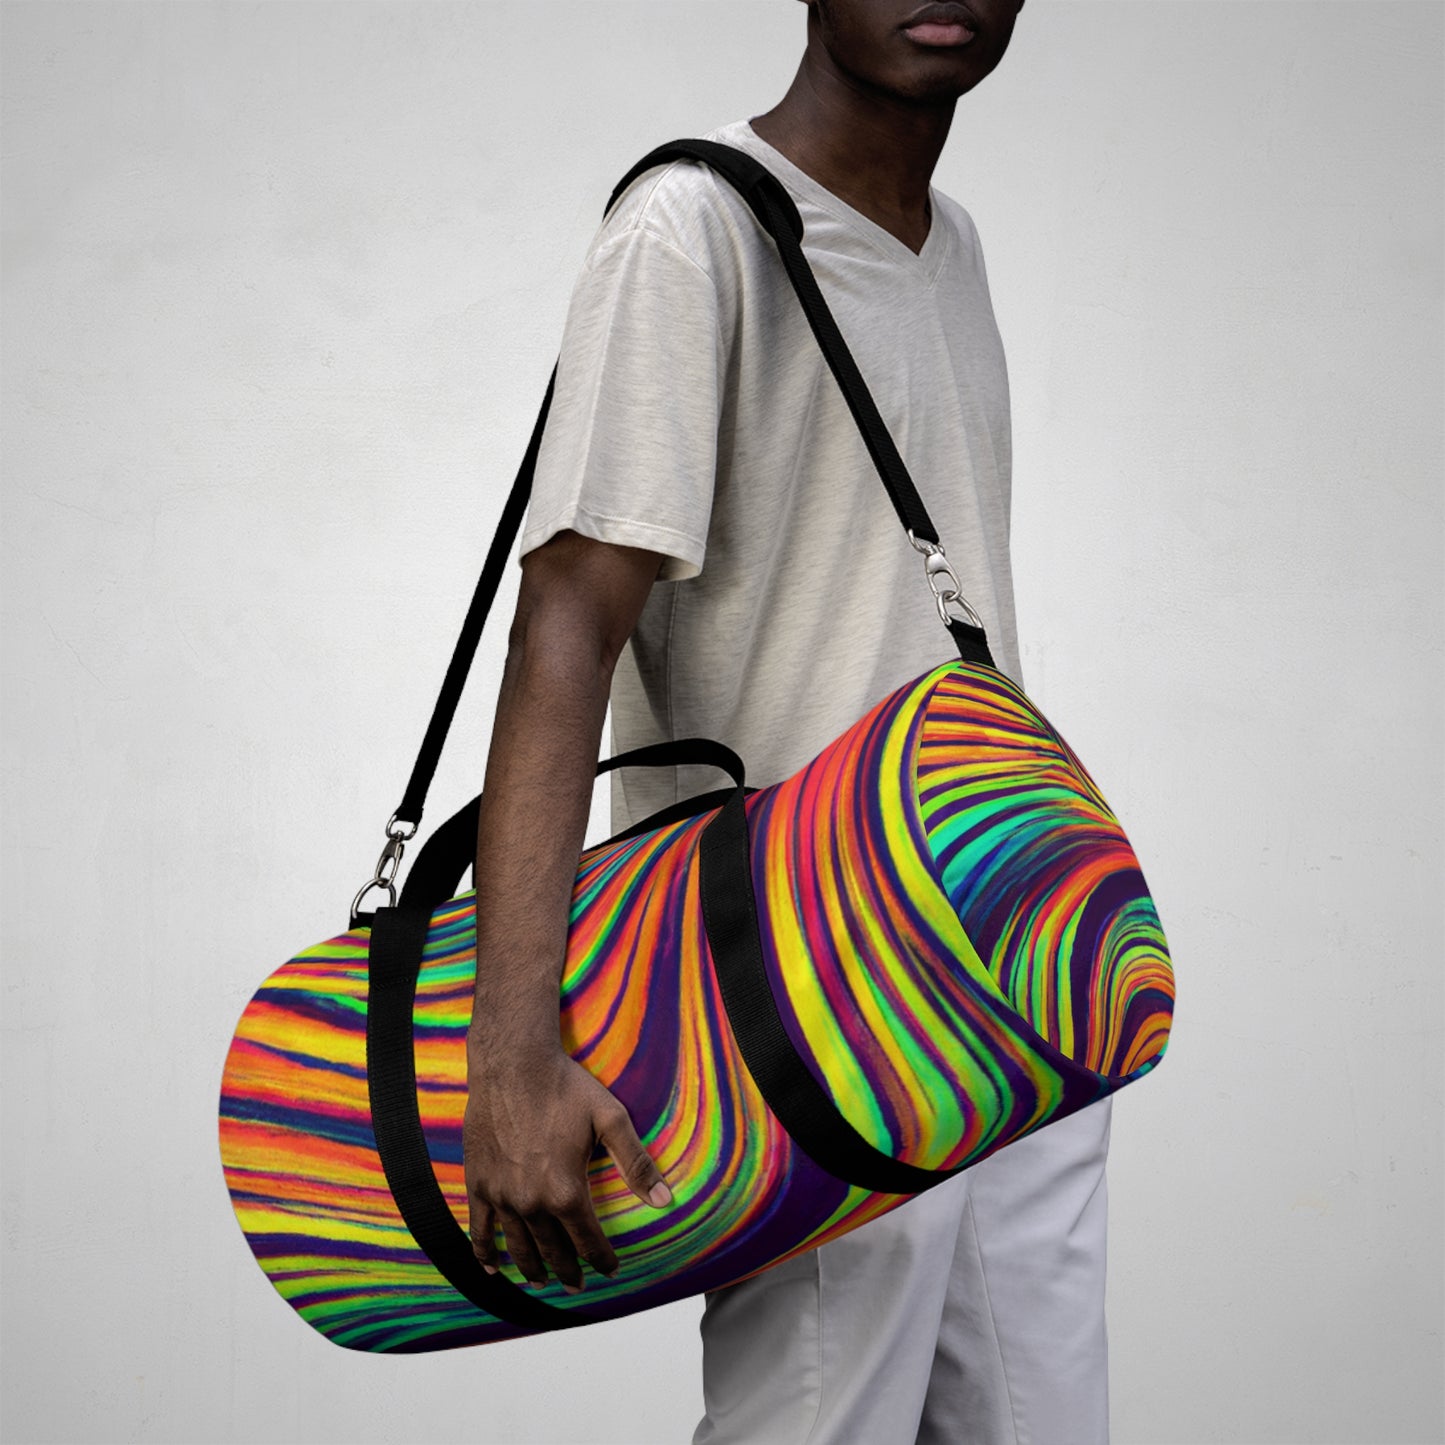 Chateauluxe - Psychedelic Duffel Bag